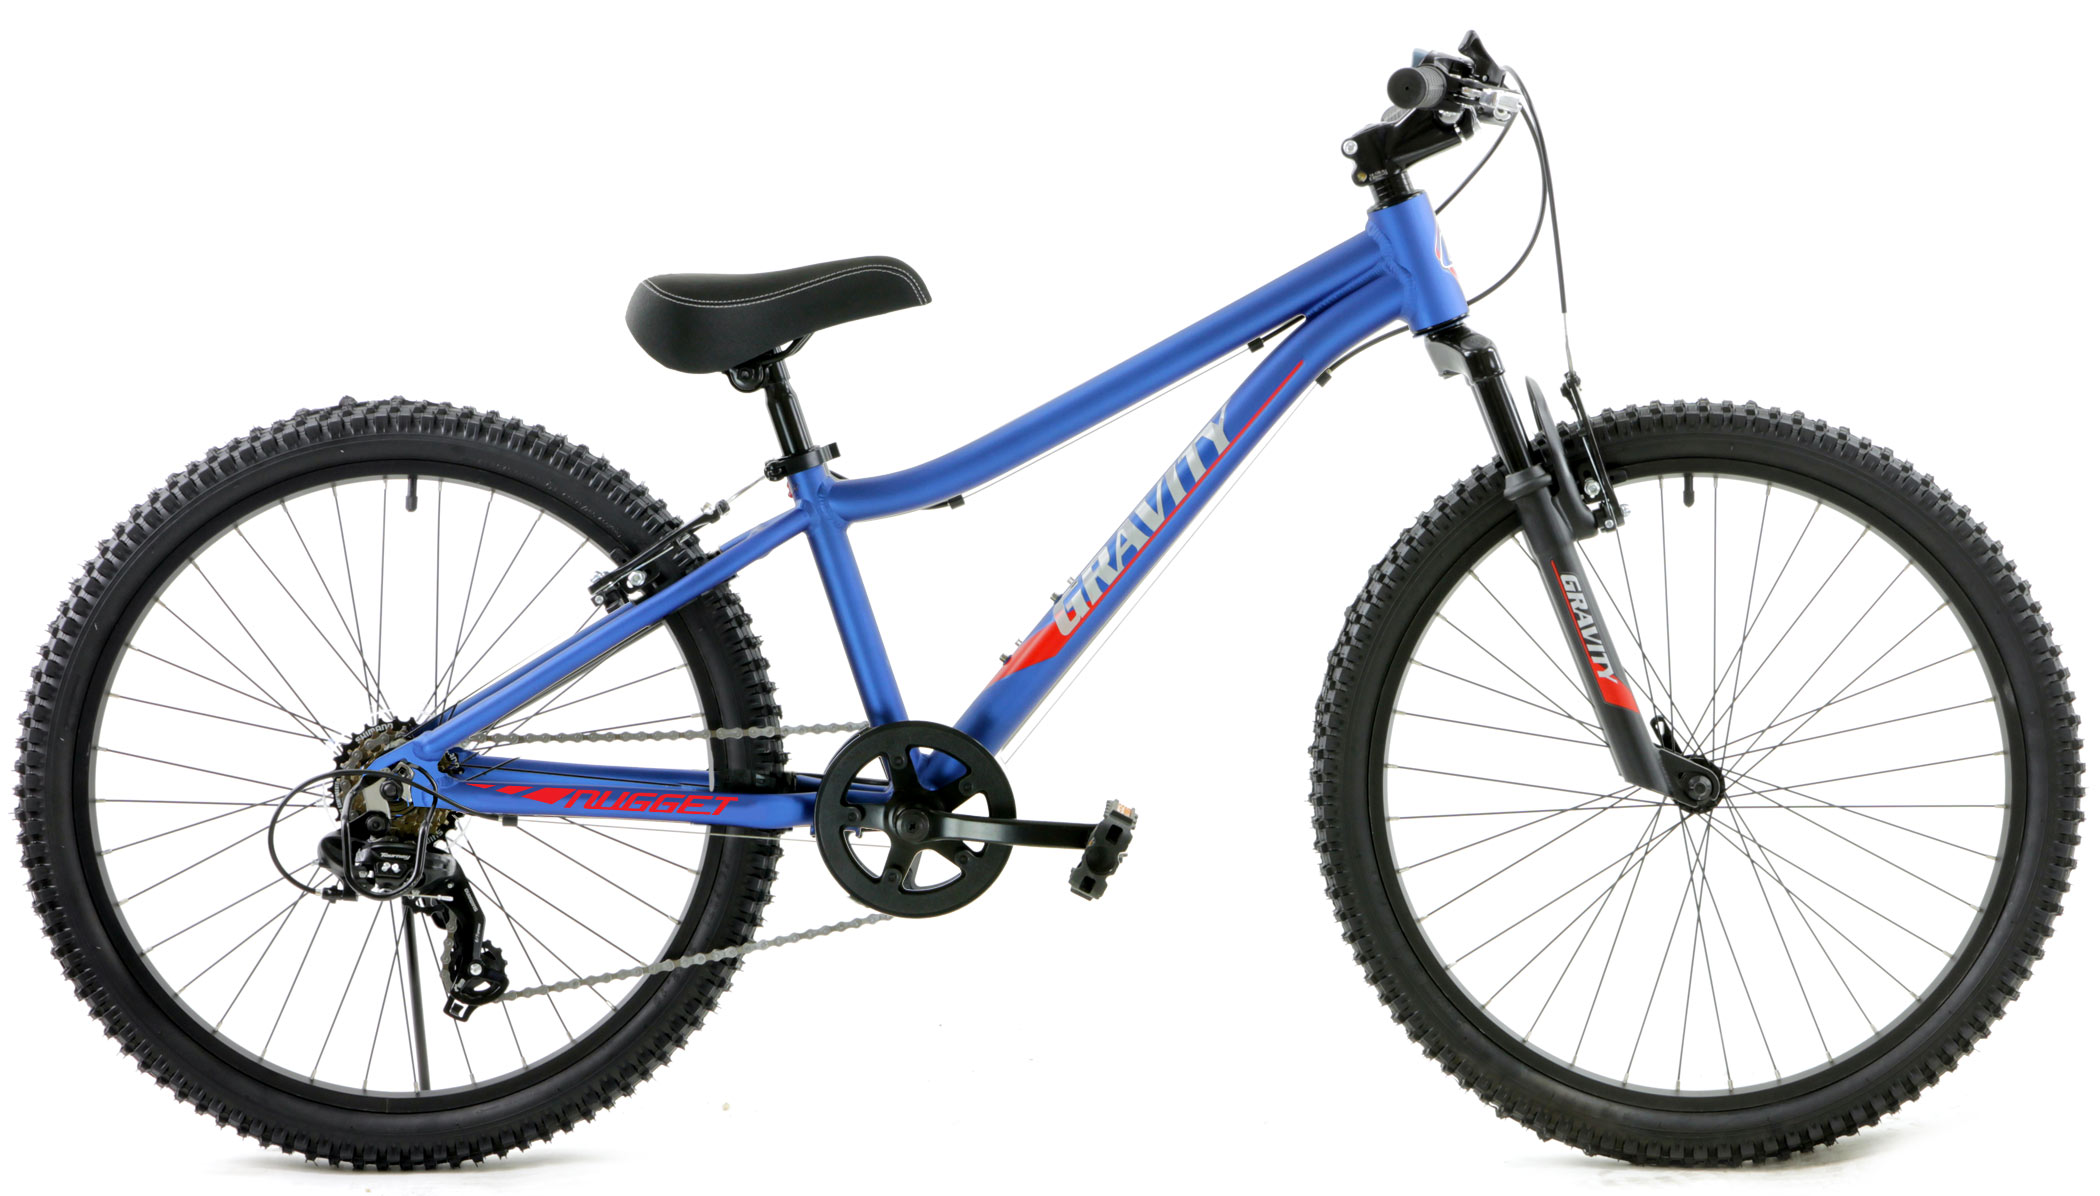 Save Up to 60% Off Bike Shop Quality Mountain Bikes for Lil Riders